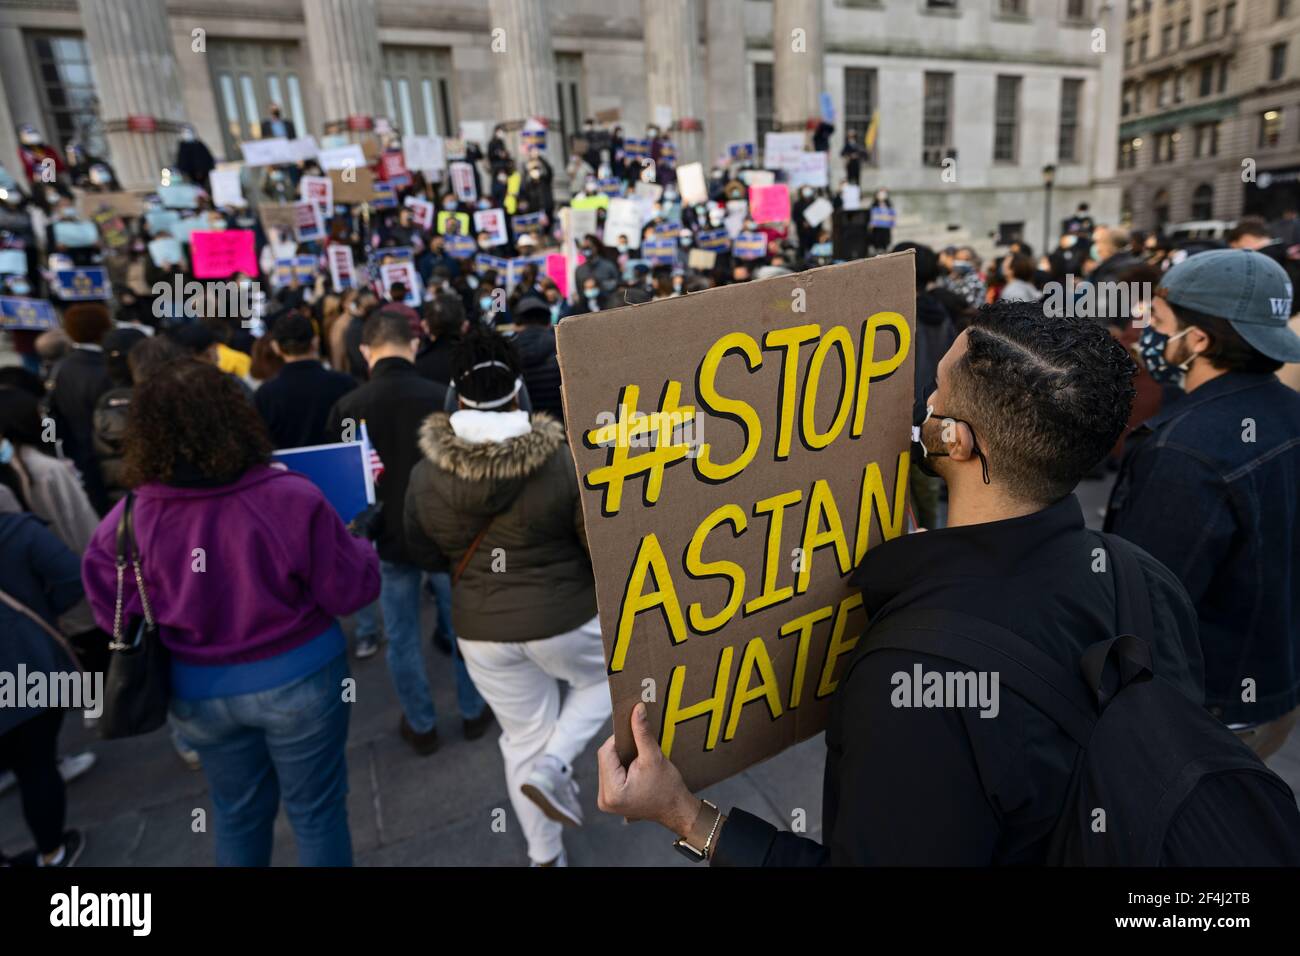 Brooklyn, New York, USA. 21 March 2021 Man holds 'Stop Asian Hate' sign during rally against violence and discrimination after recent attacks against Asian-Americans in New York City and across the U.S. during the COVID-19 pandemic. Credit: Joseph Reid/Alamy Live News Stock Photo